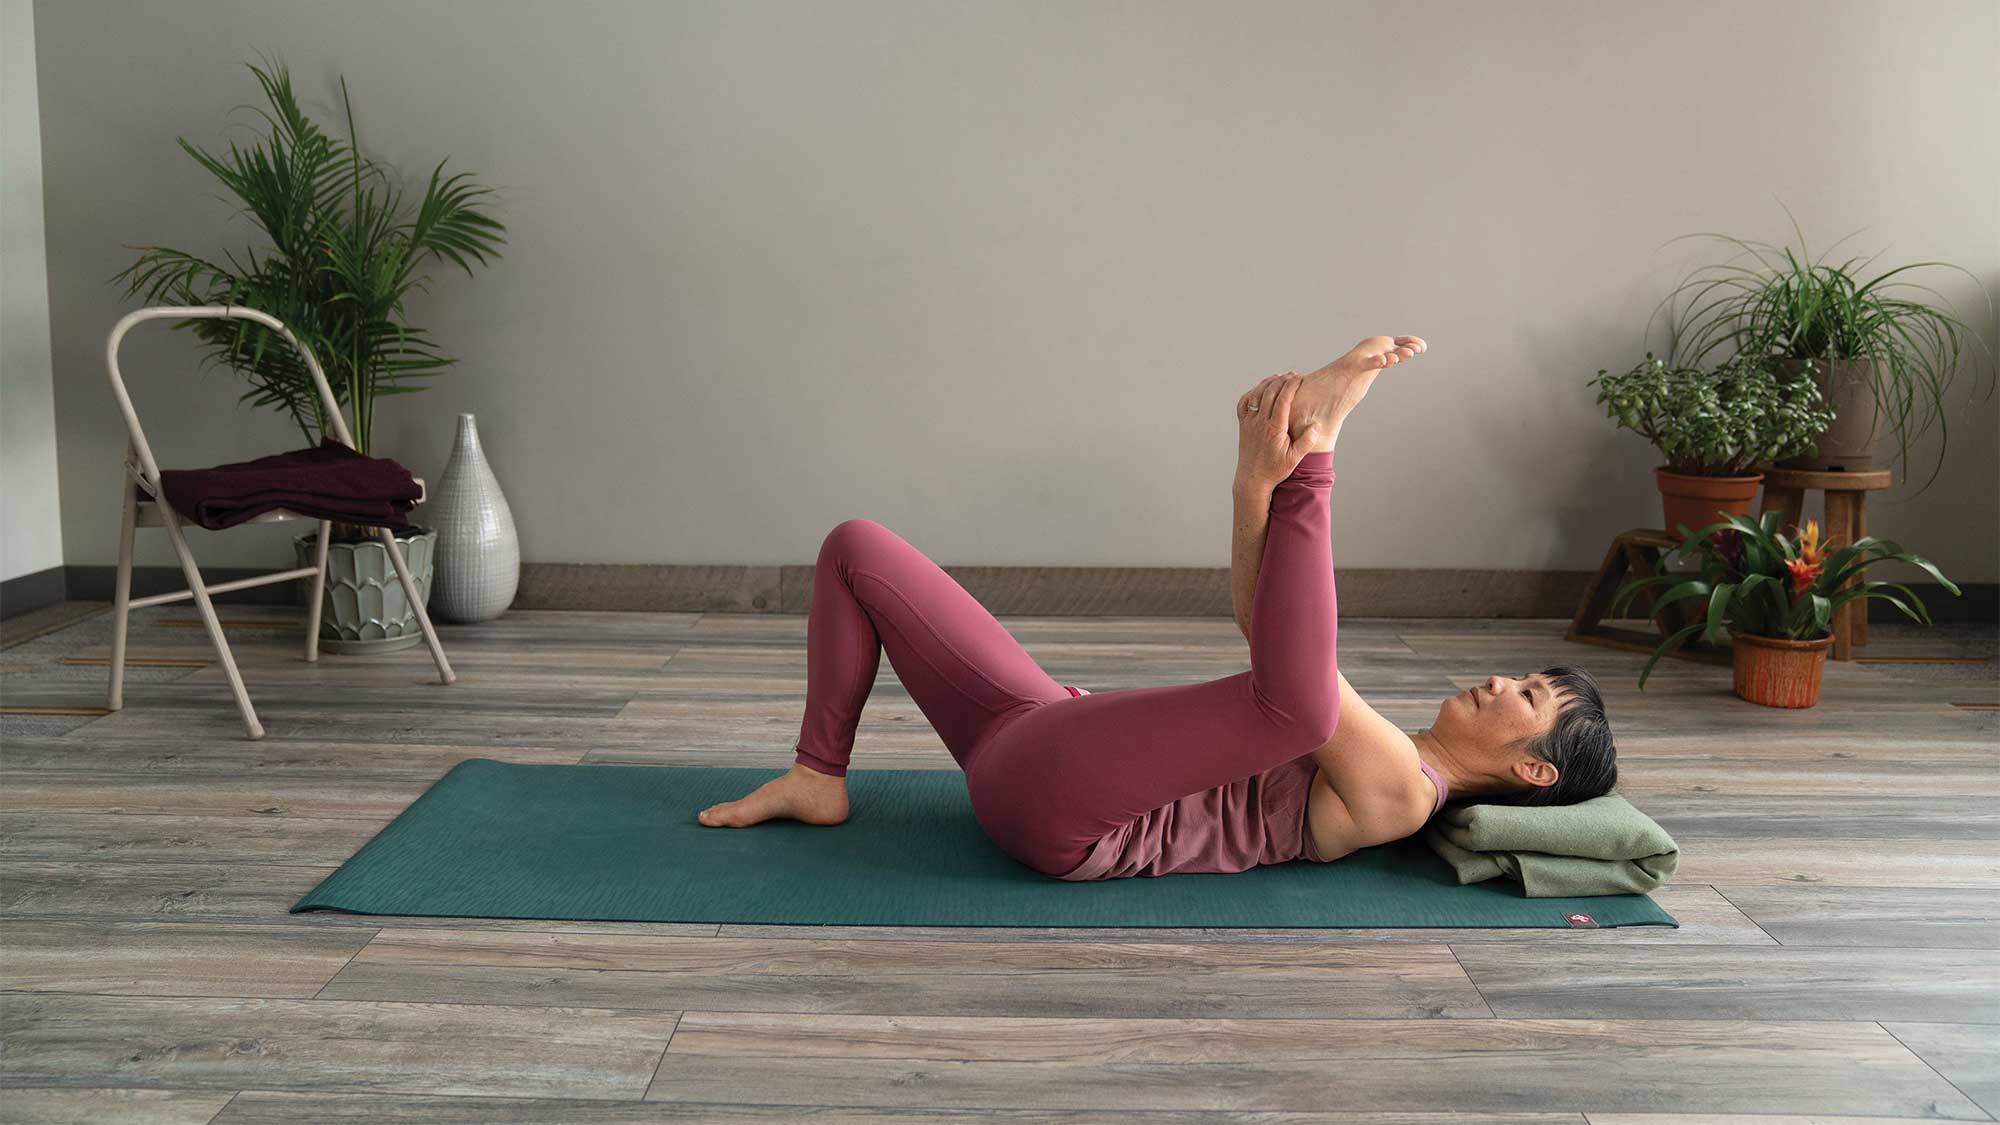 Pelvic health wellness store | Pelvic Pain or tightness? Try this quick 5  minute mobility routine to length and relax the muscles, fascia and tissue  around your pelvis!... | Instagram